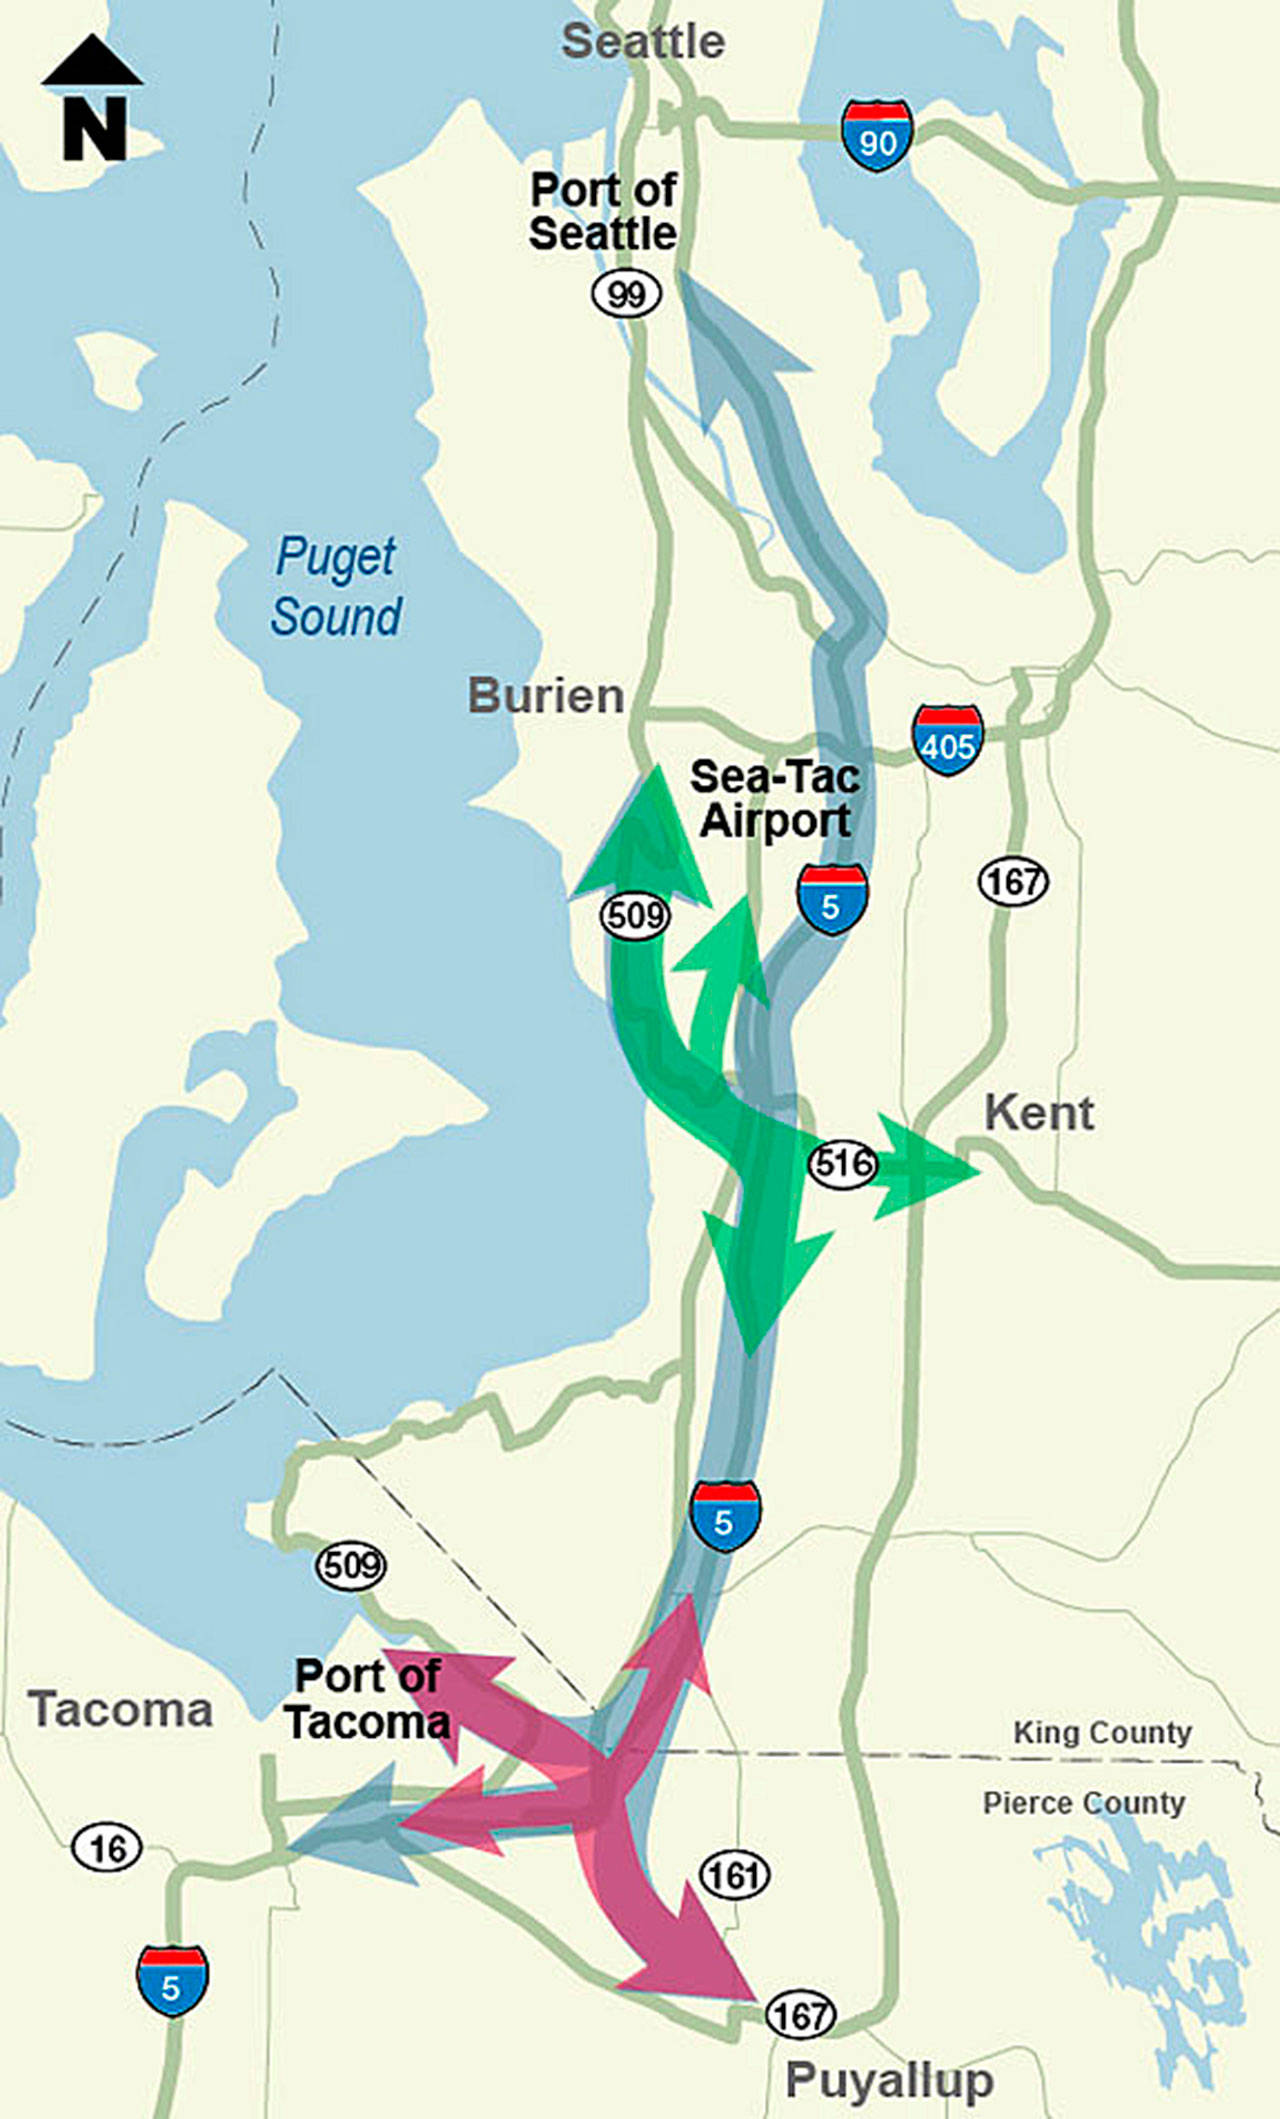 The Washington State Department of Transportation plans to expand State Route 509 and State Route 167 at a cost of about $2 billion.